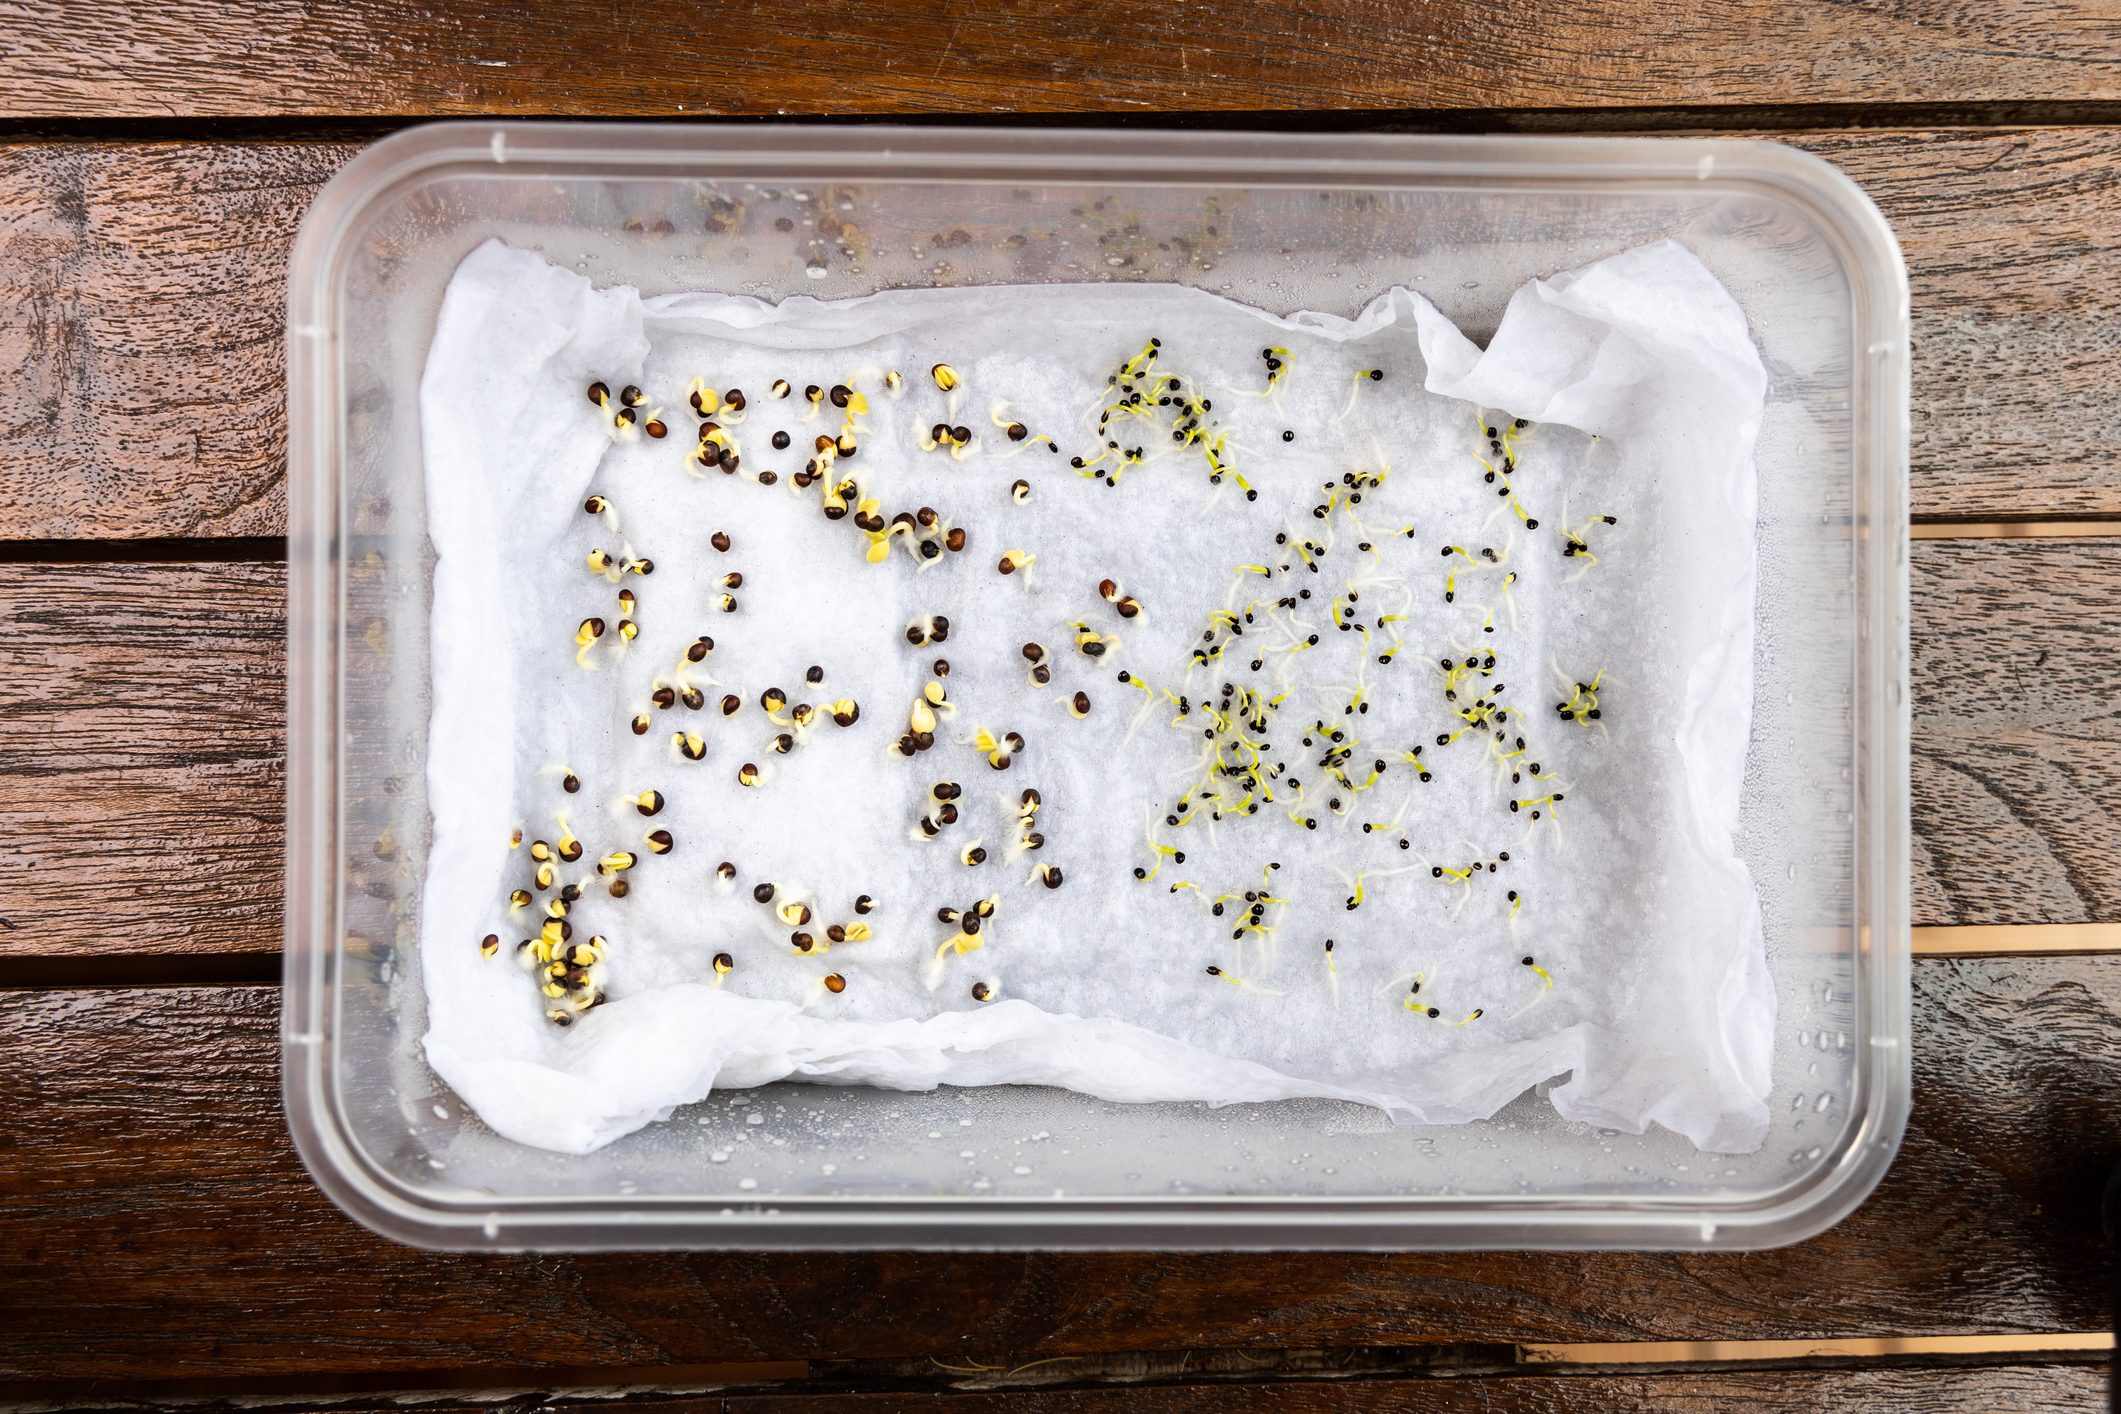 Seeds are placed in moist water soaked kitchen towel to germinate in container